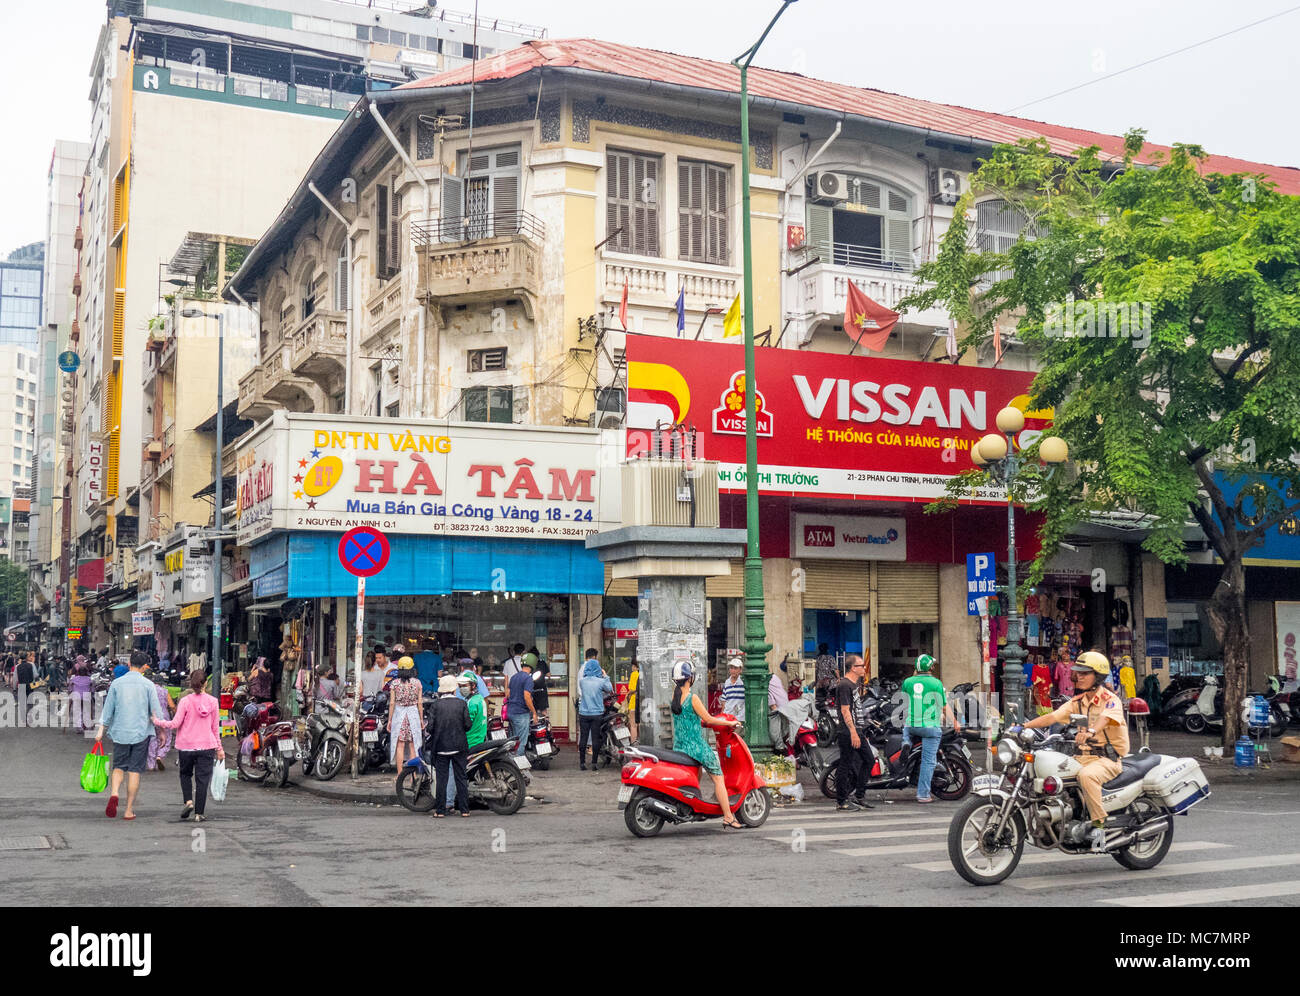 Billboards hiding french colonial architecture on a busy intersection near the Ben Thanh markets, in Ho Chi Minh City, Vietnam. Stock Photo